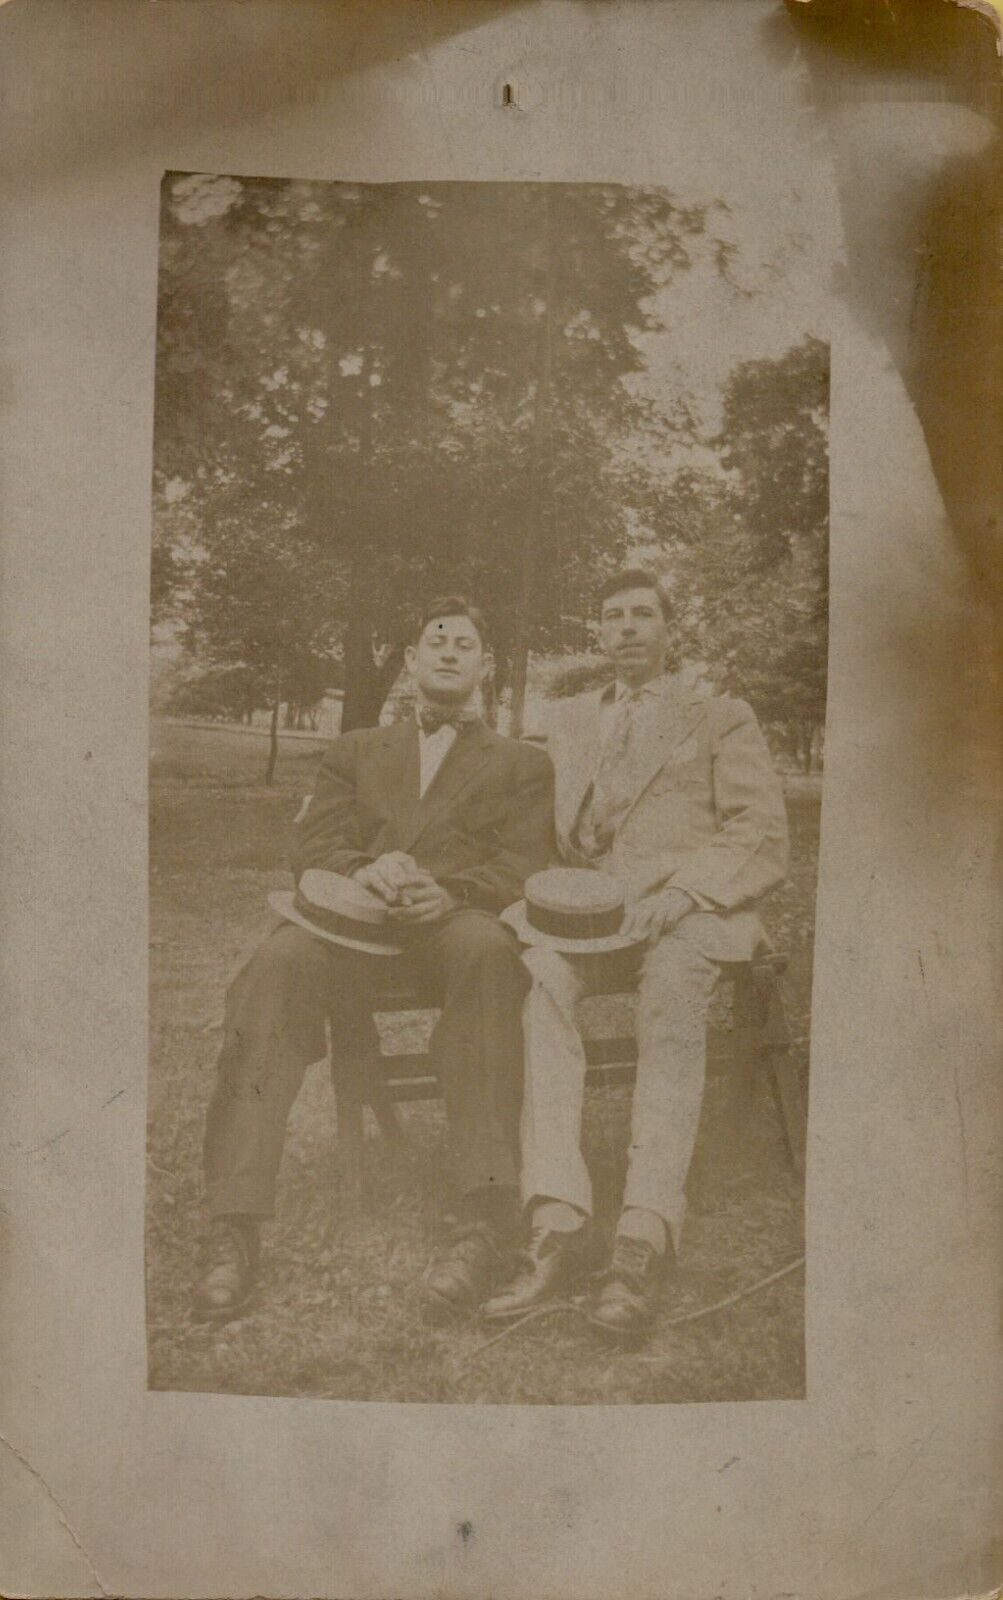 c1910s RPPC of Two Men in Suits with Hats in Laps Outside Real Photo Postcard